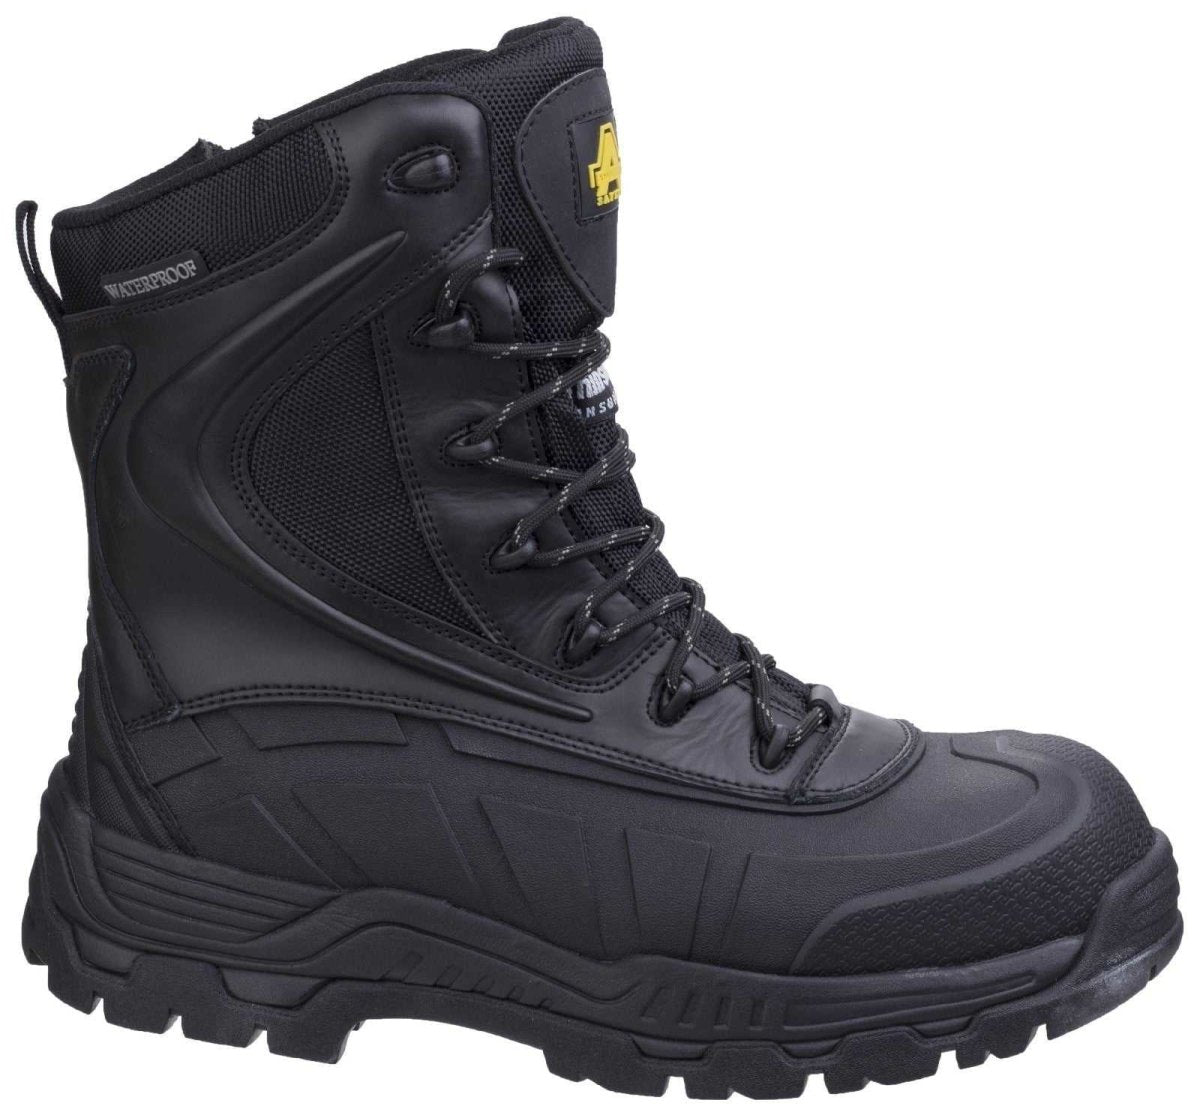 Amblers AS440 Mens Waterproof Safety Boots - Shoe Store Direct